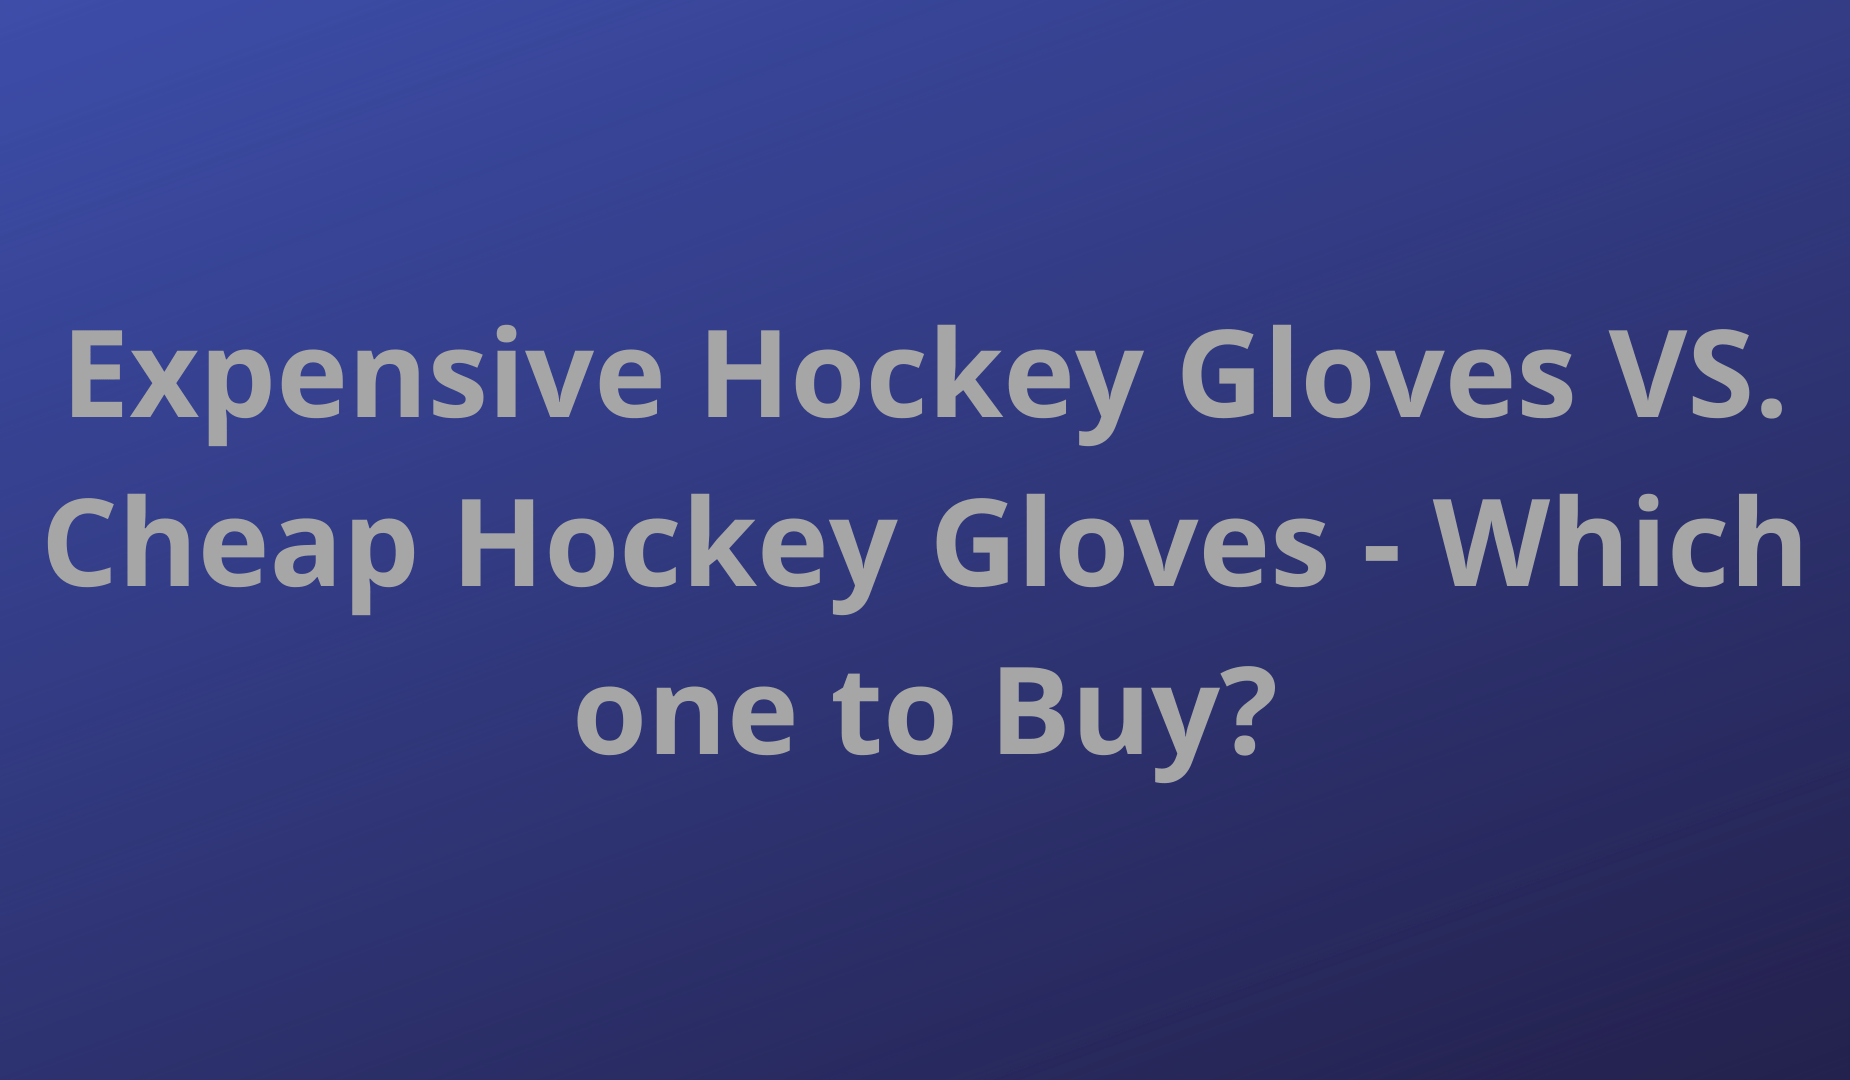 Expensive Hockey Gloves VS. Cheap Hockey Gloves - Which one to Buy?